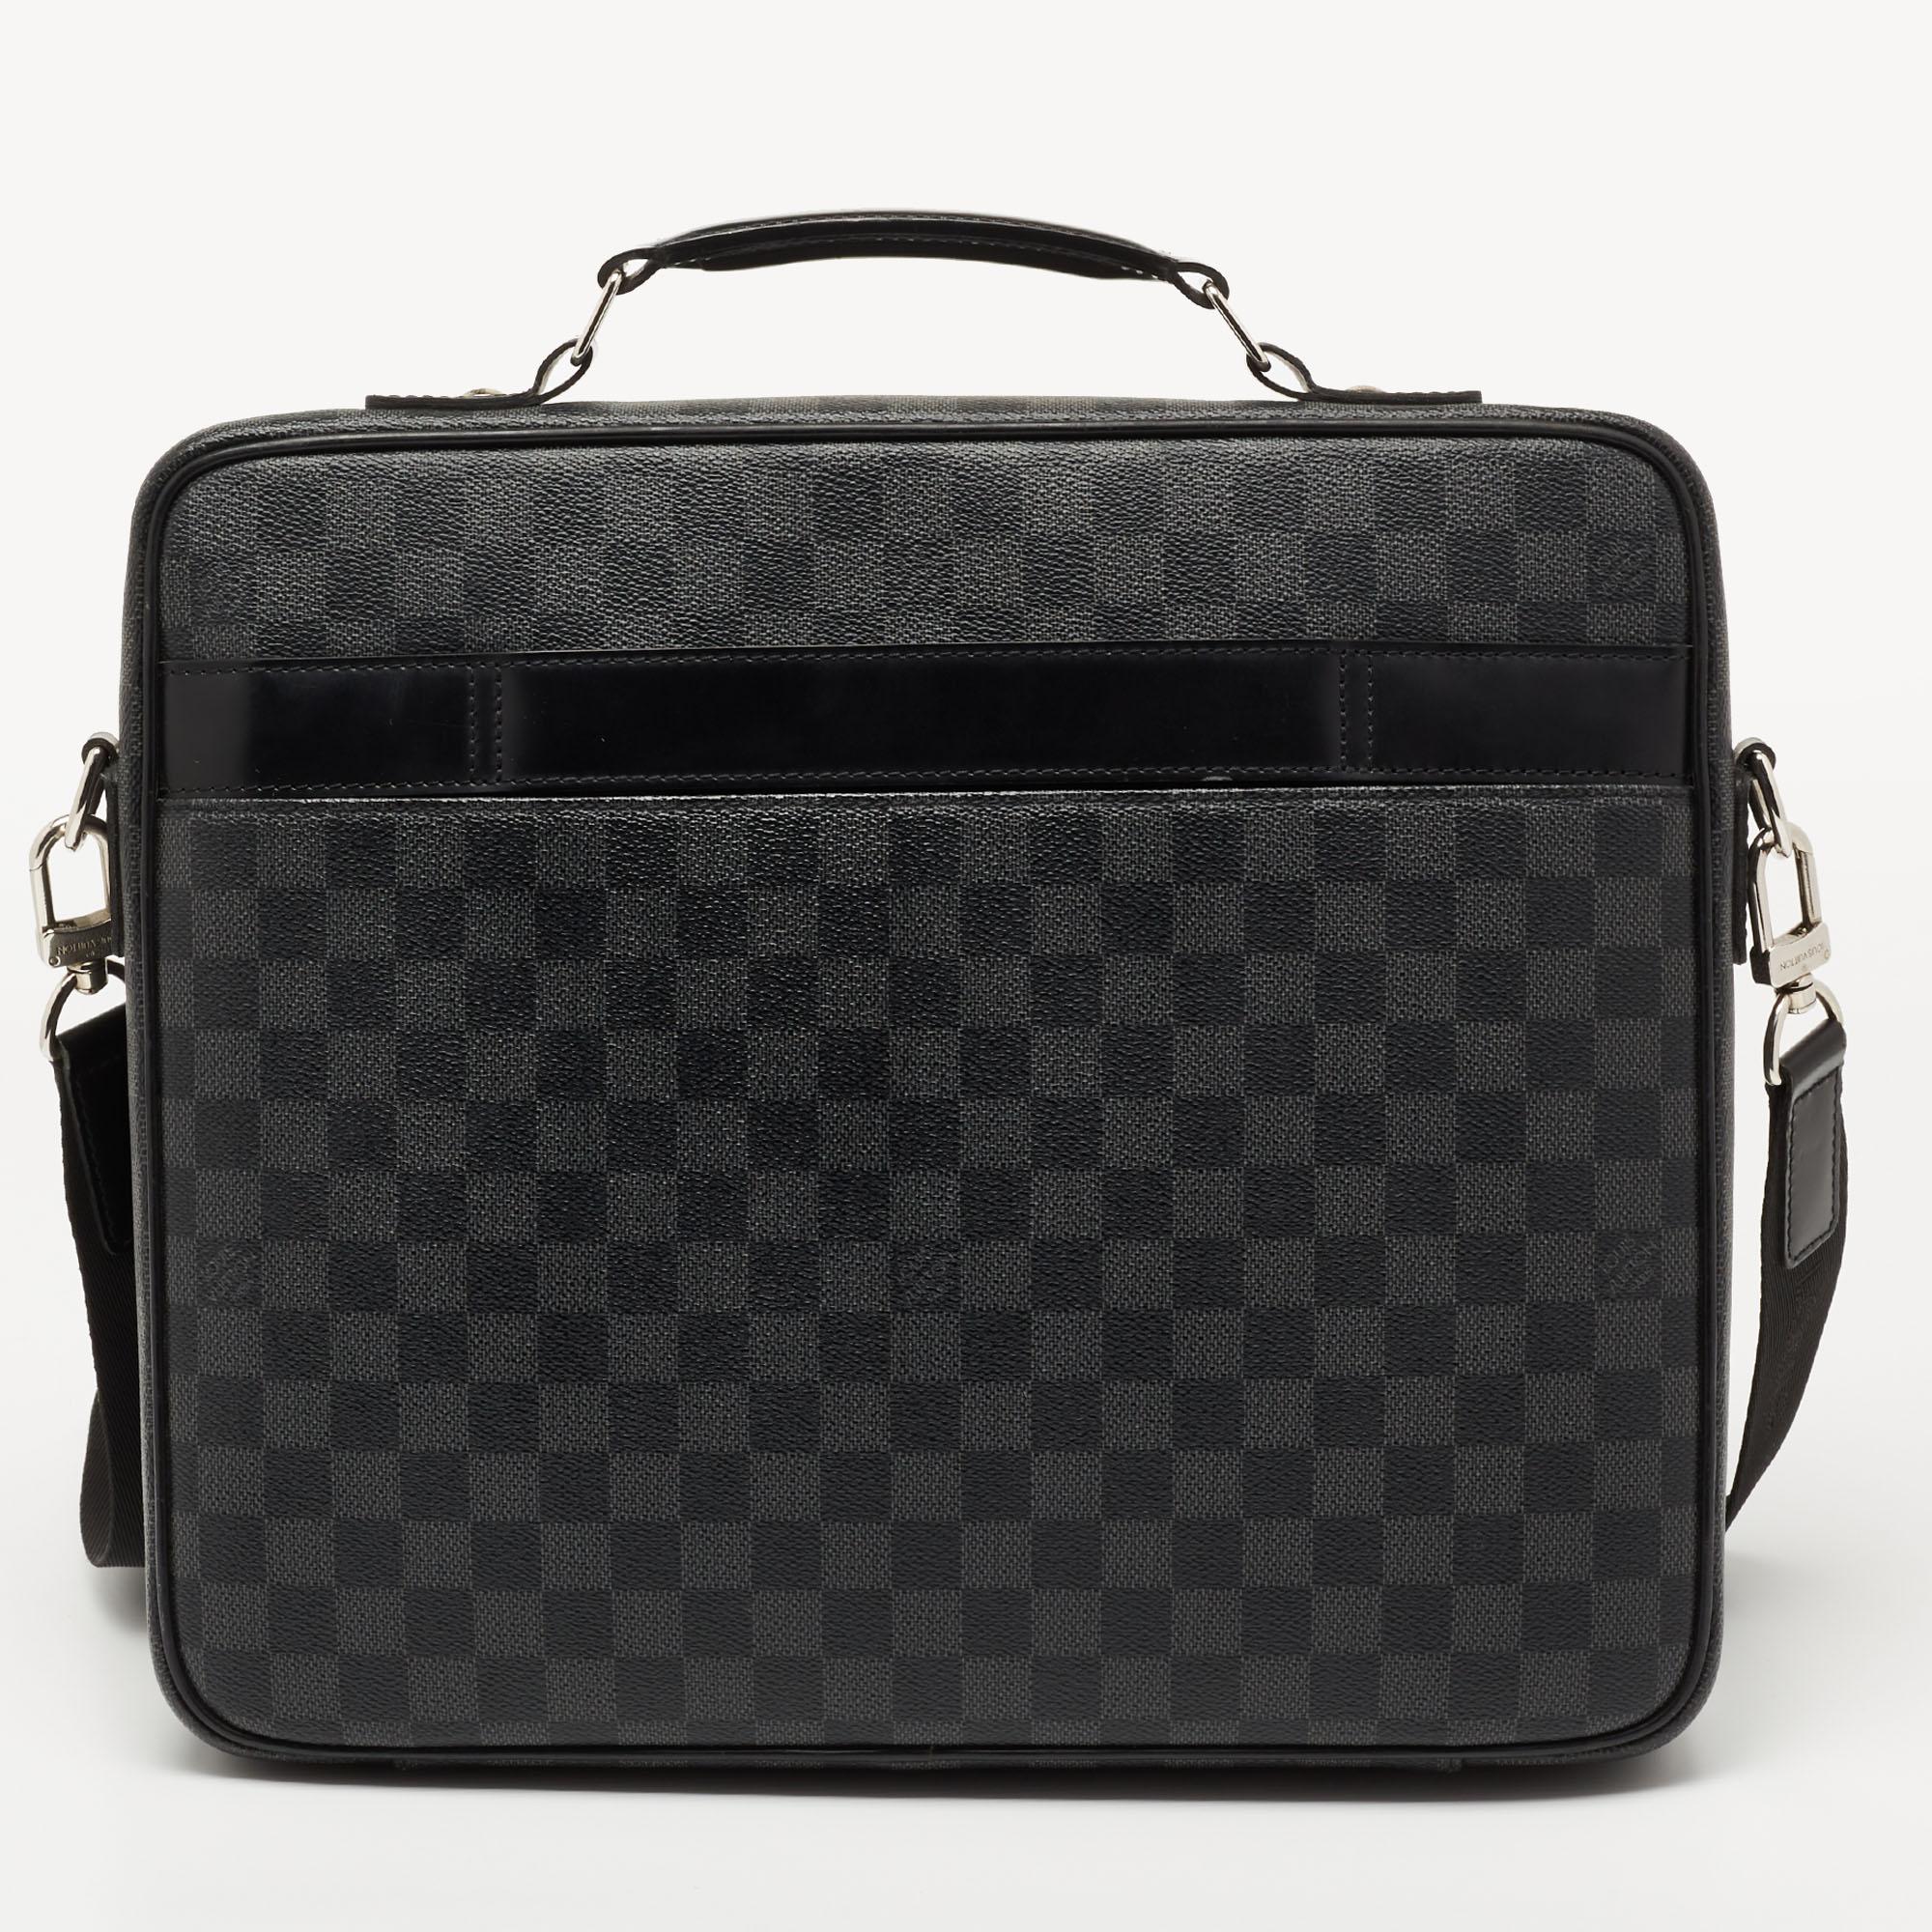 This Louis Vuitton Graffit Steve briefcase is an ultra-functional choice to carry your essentials! Crafted using Damier Graphite canvas into a sleek silhouette, the briefcase is perfect for frequent use. The top handle and detachable strap make it